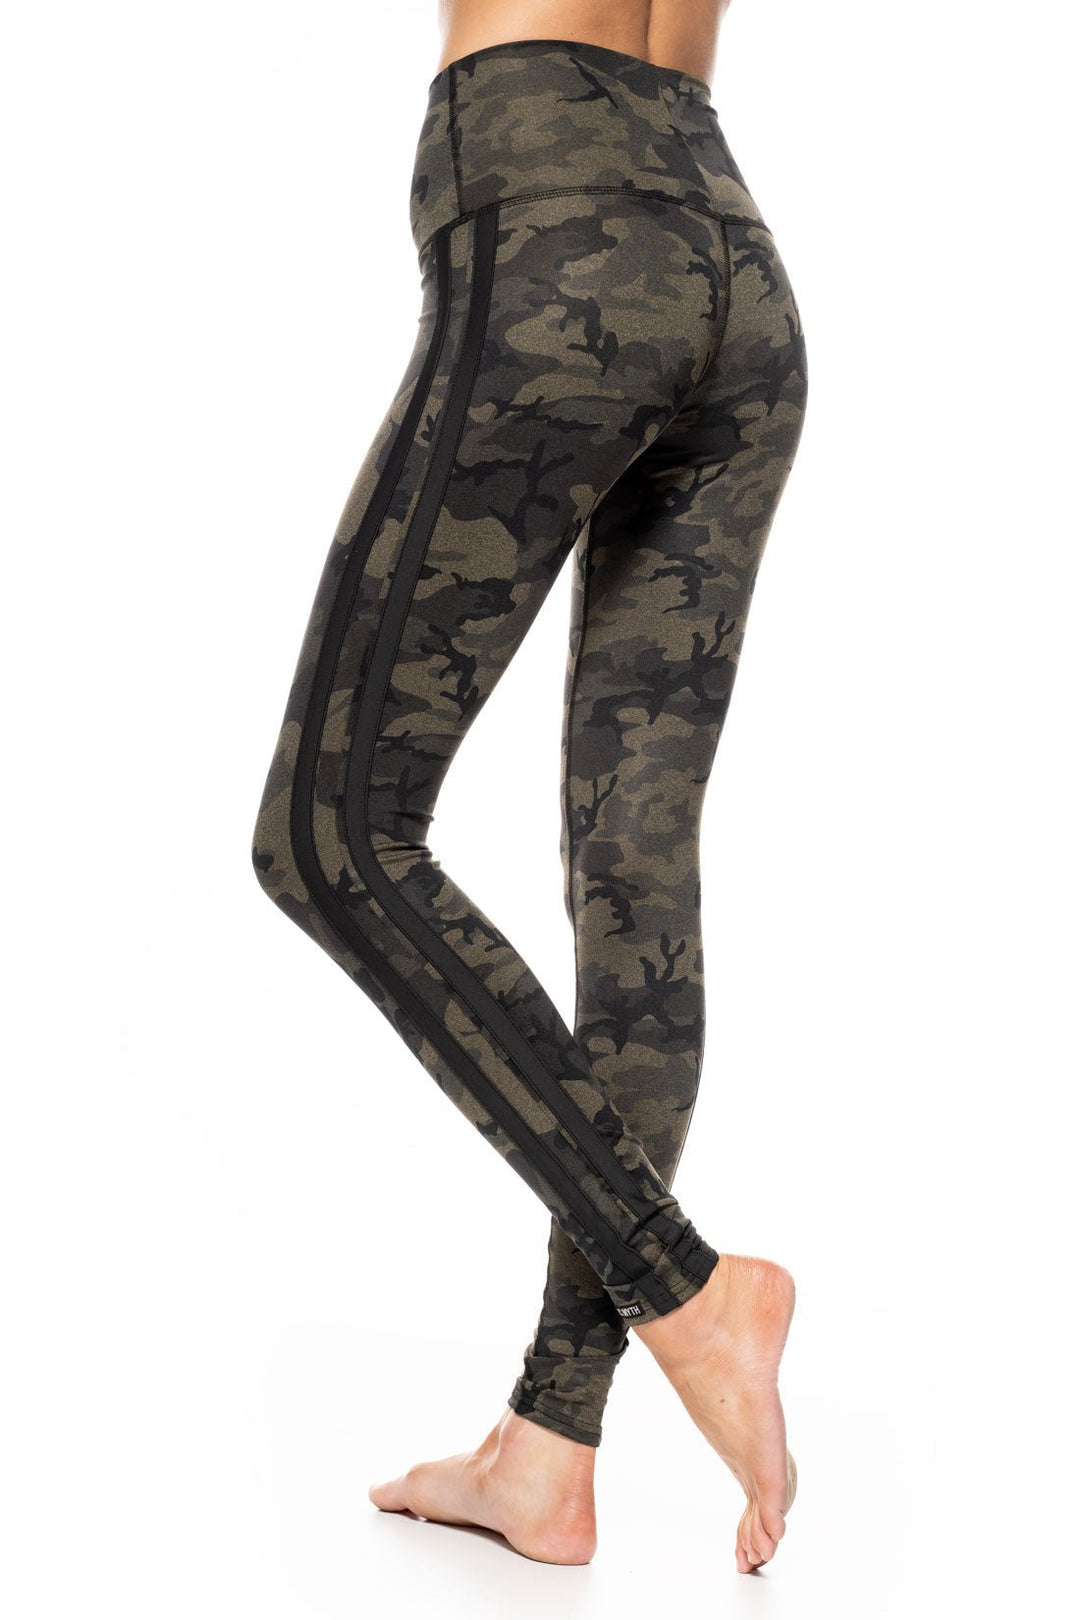 green and black camouflage high waist leggings with black side stripes